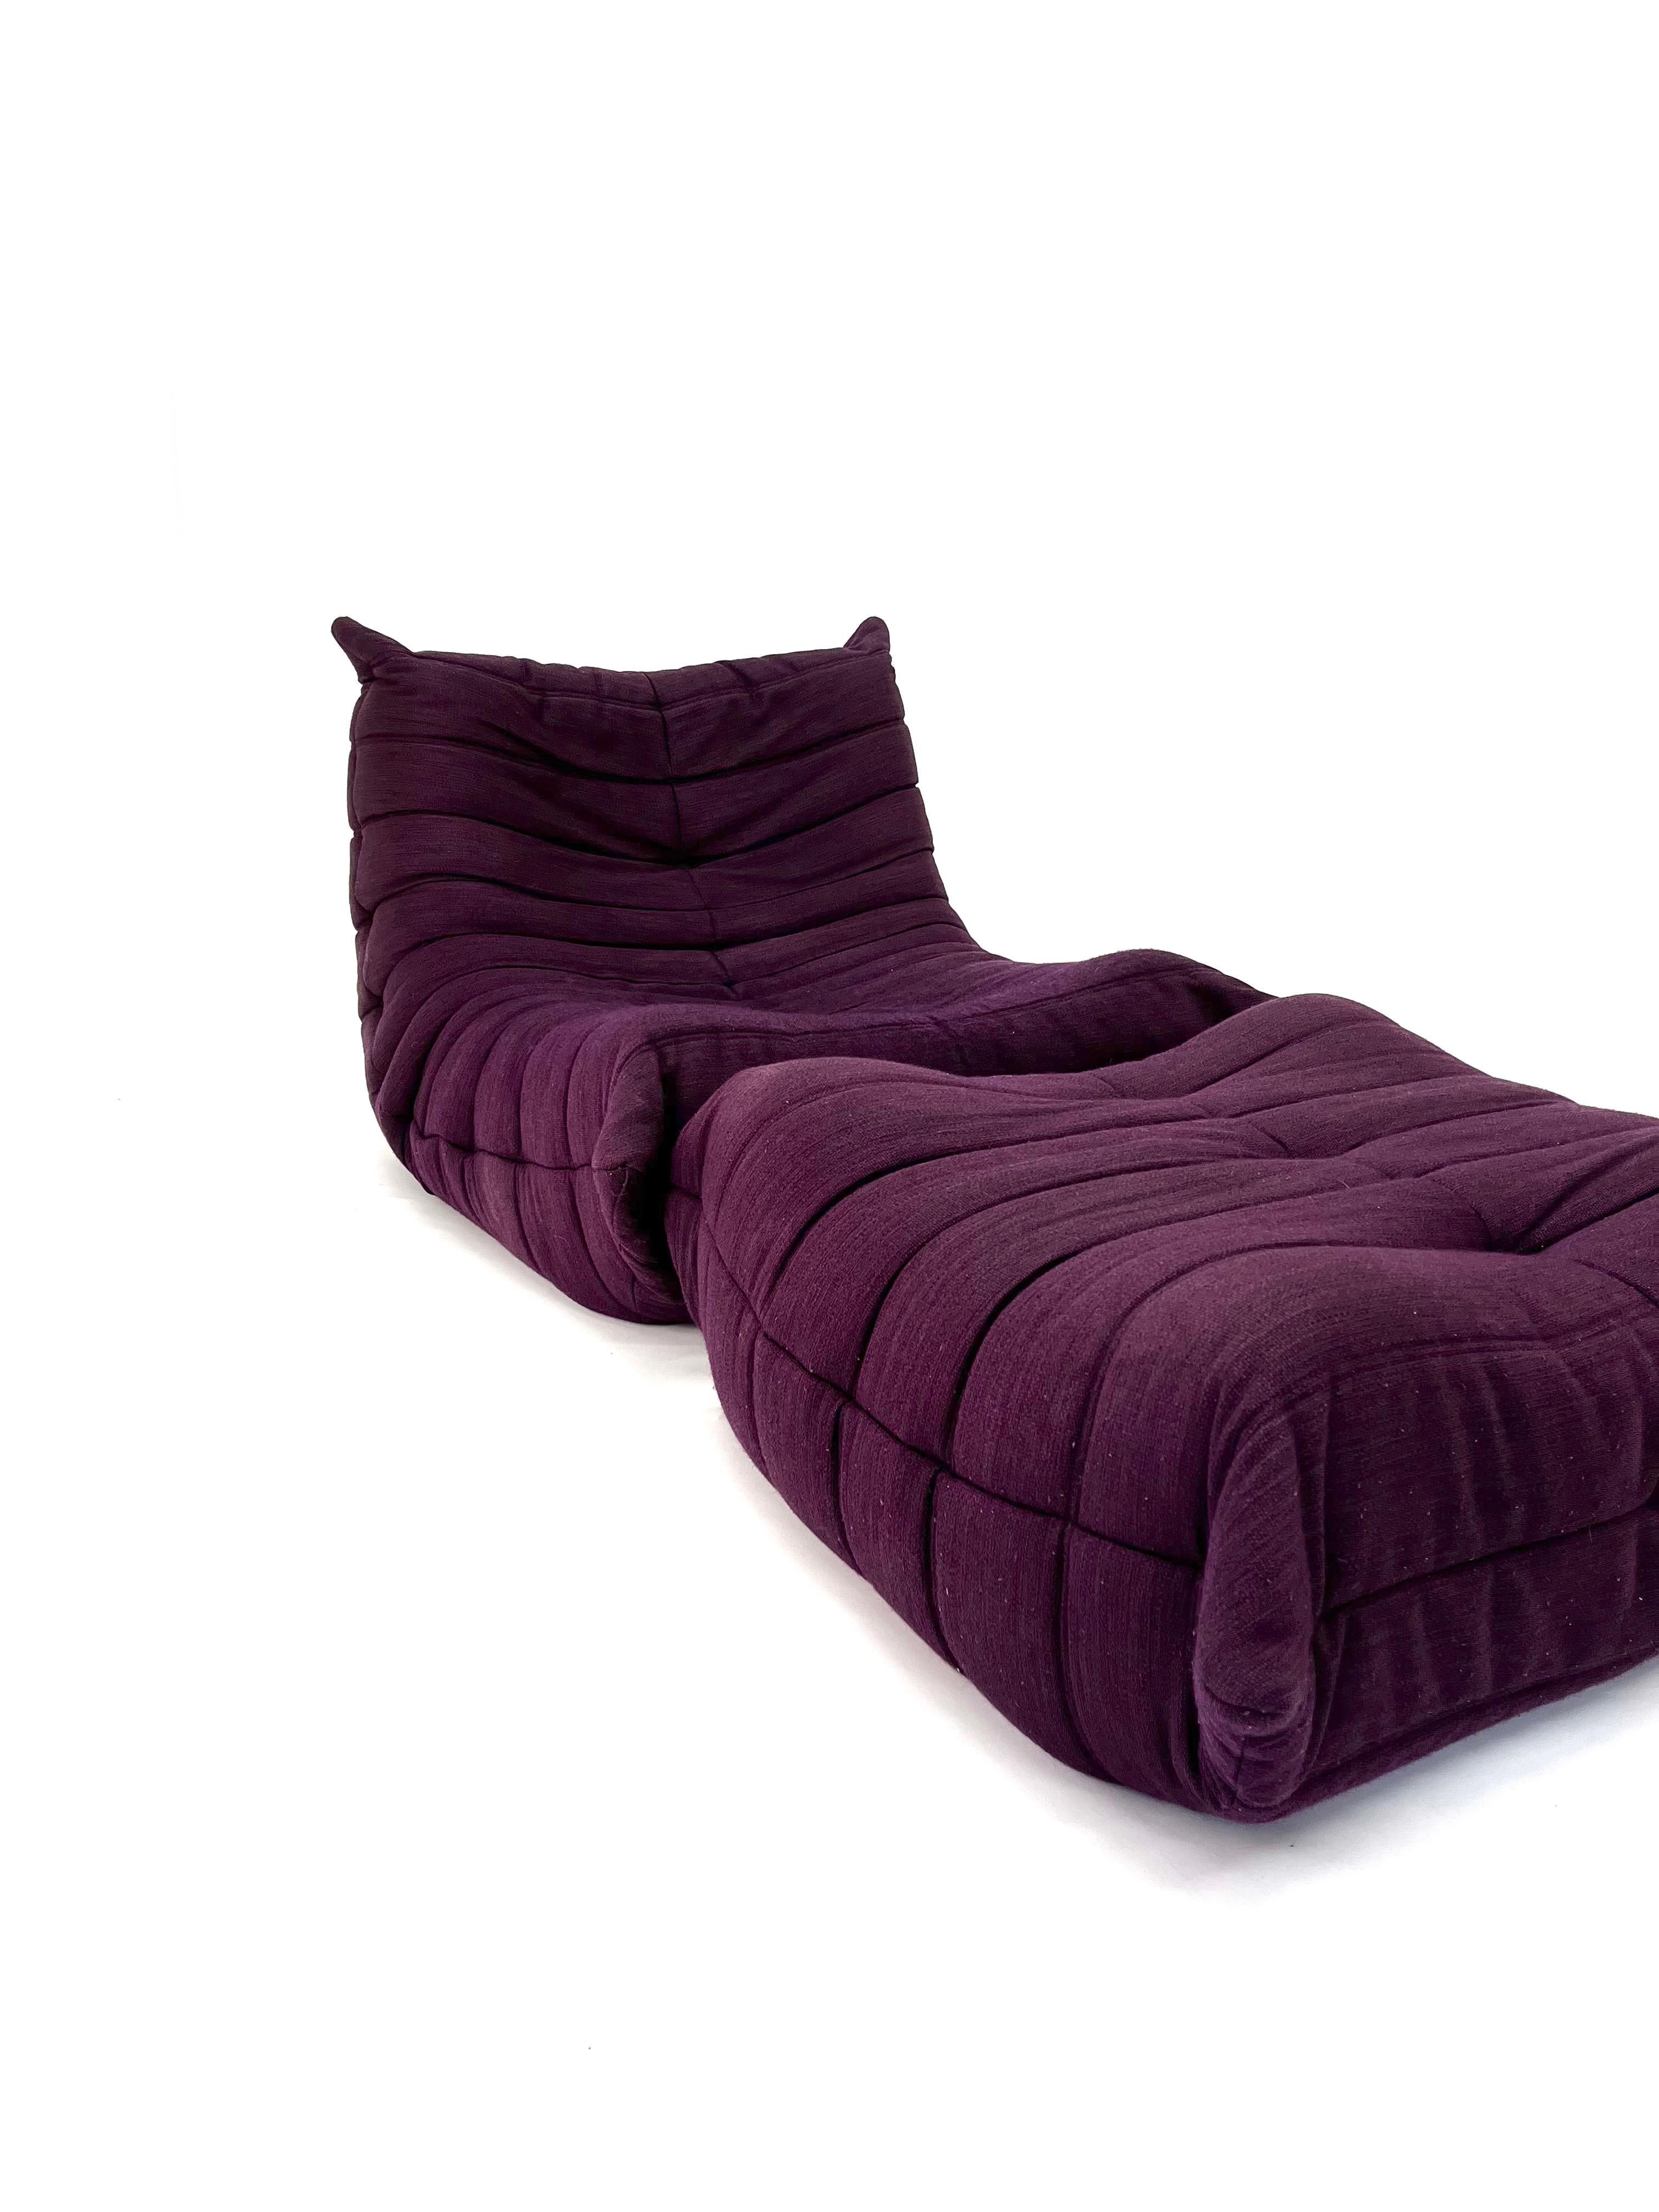 Togo Chair and Ottoman in Purple by Michel Ducaroy for Ligne Roset For Sale 2